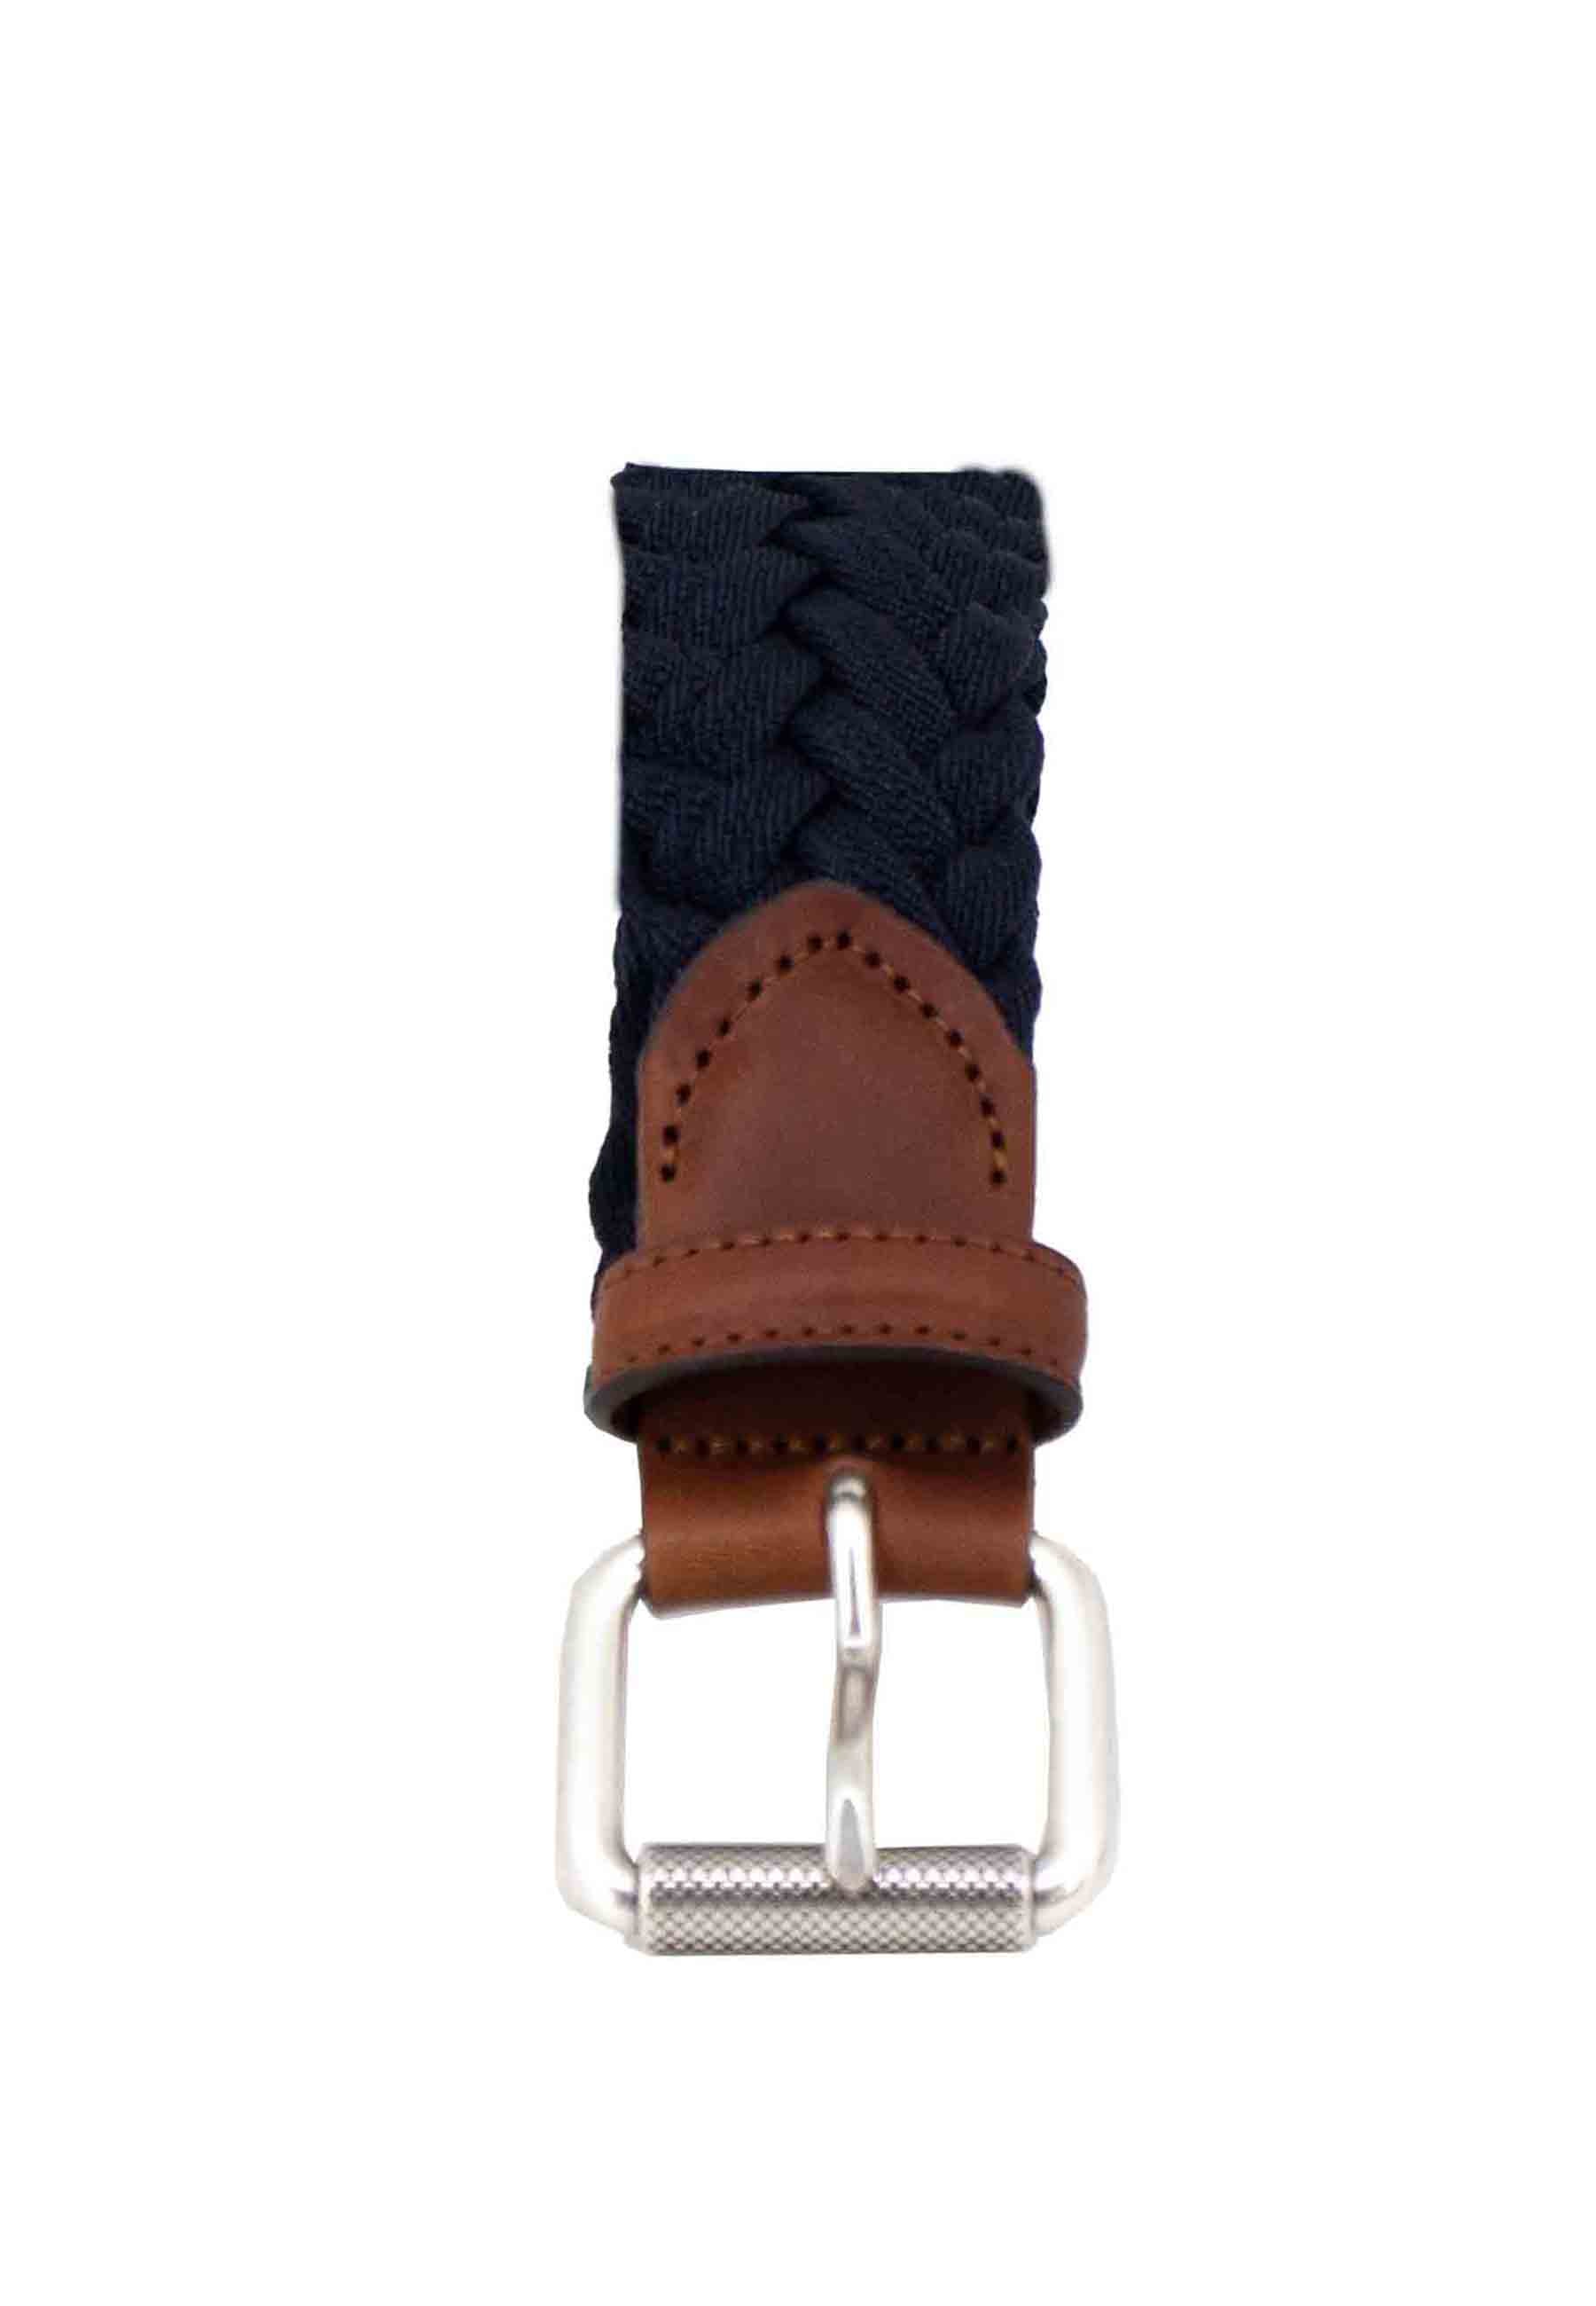 Men's belt in blue stretch fabric with silver buckle